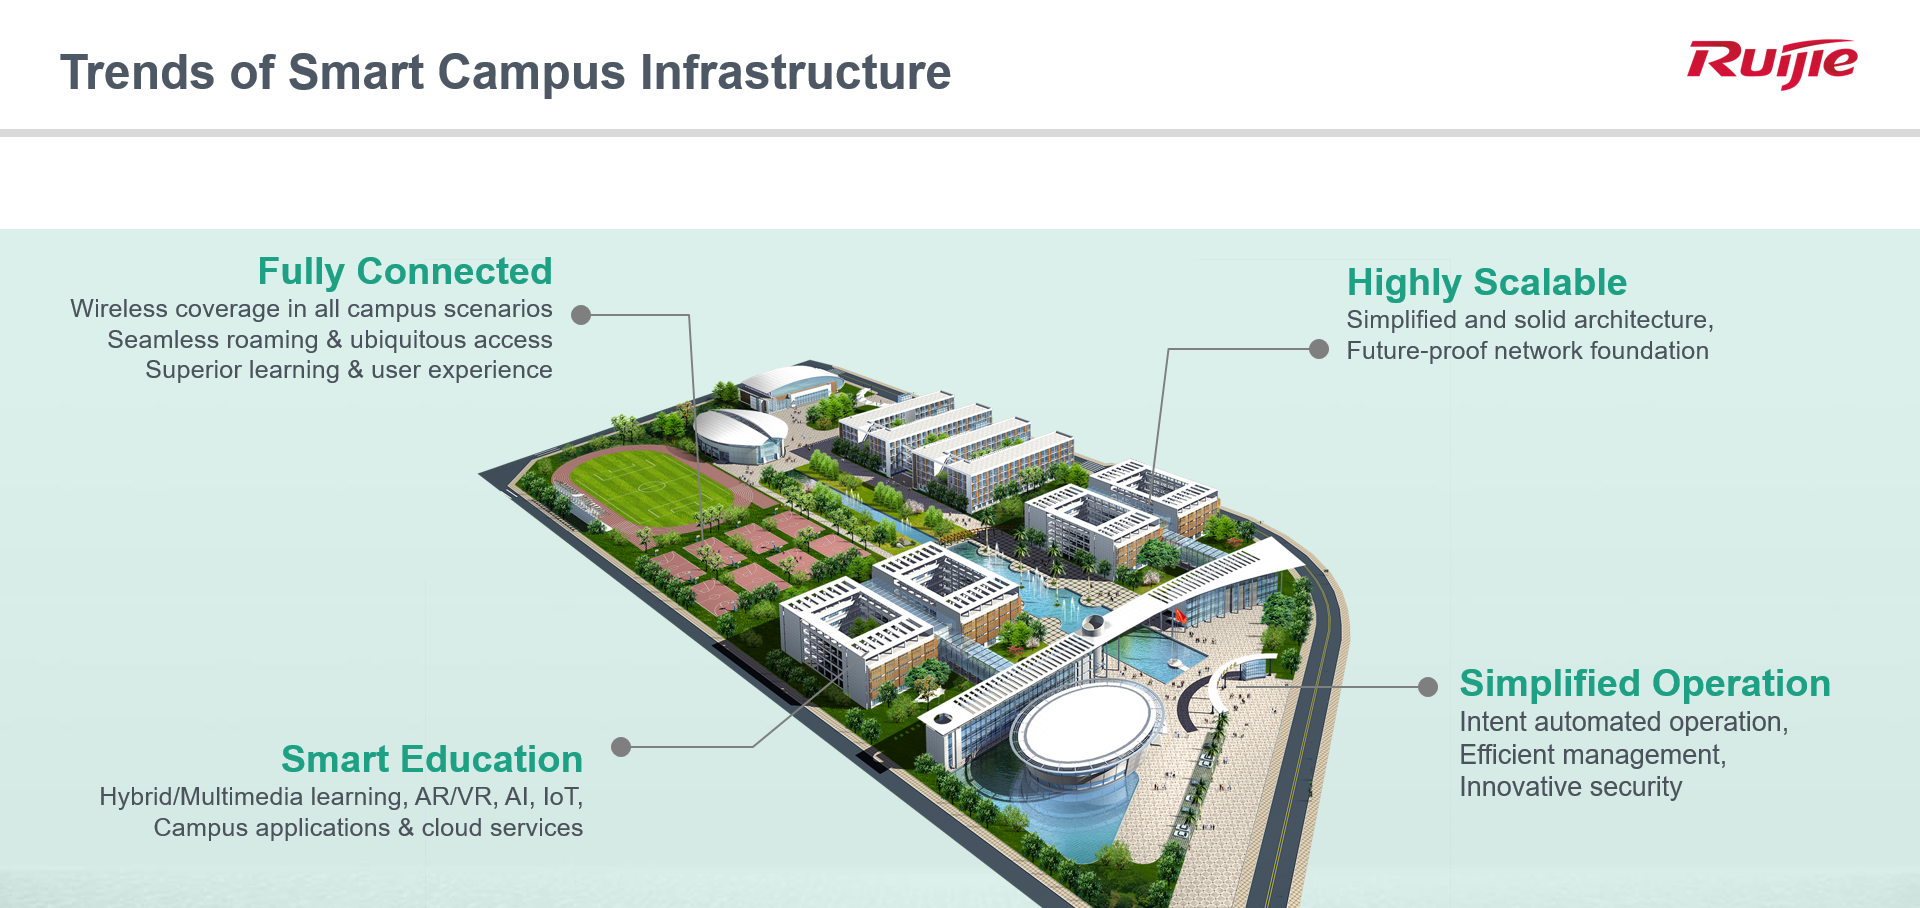 Educational technology trends of a Smart Campus: Fully connected, seamless learning, streamlined operations, future-proof scalability